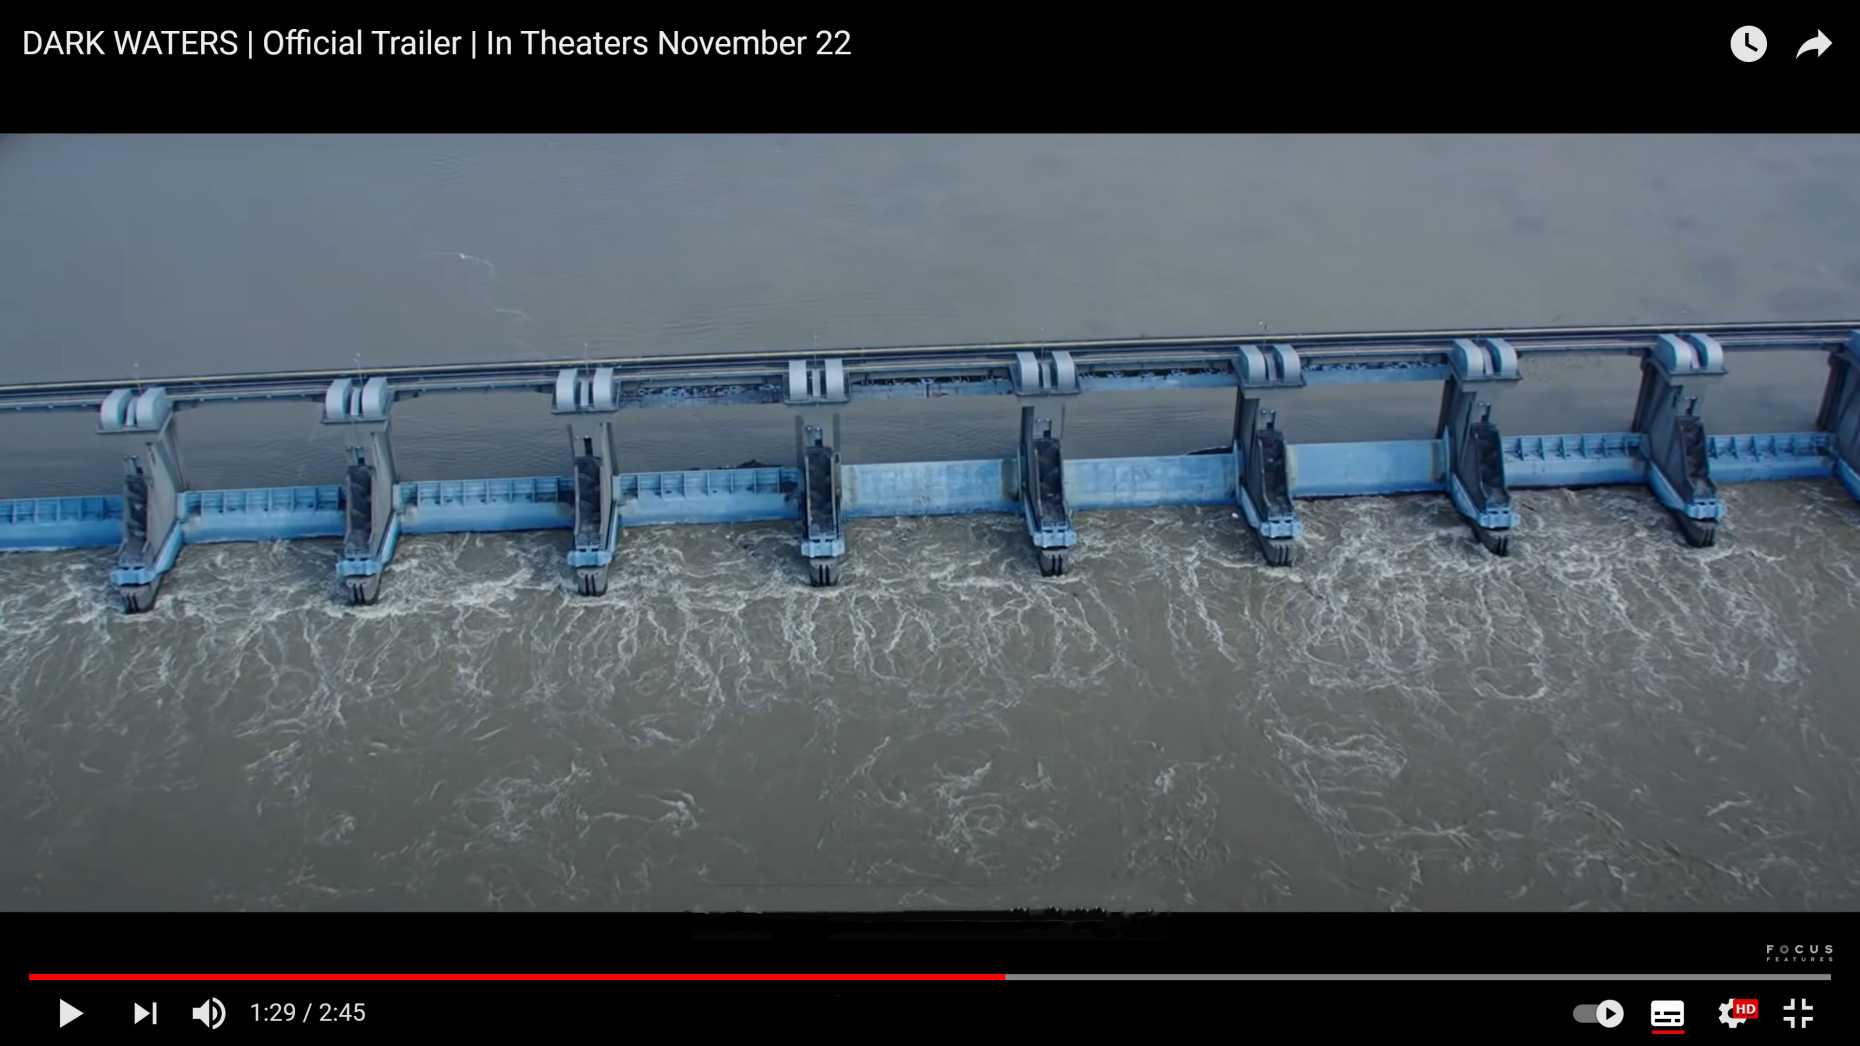 Screenshot of the official trailer "Dark Waters" on Youtube.